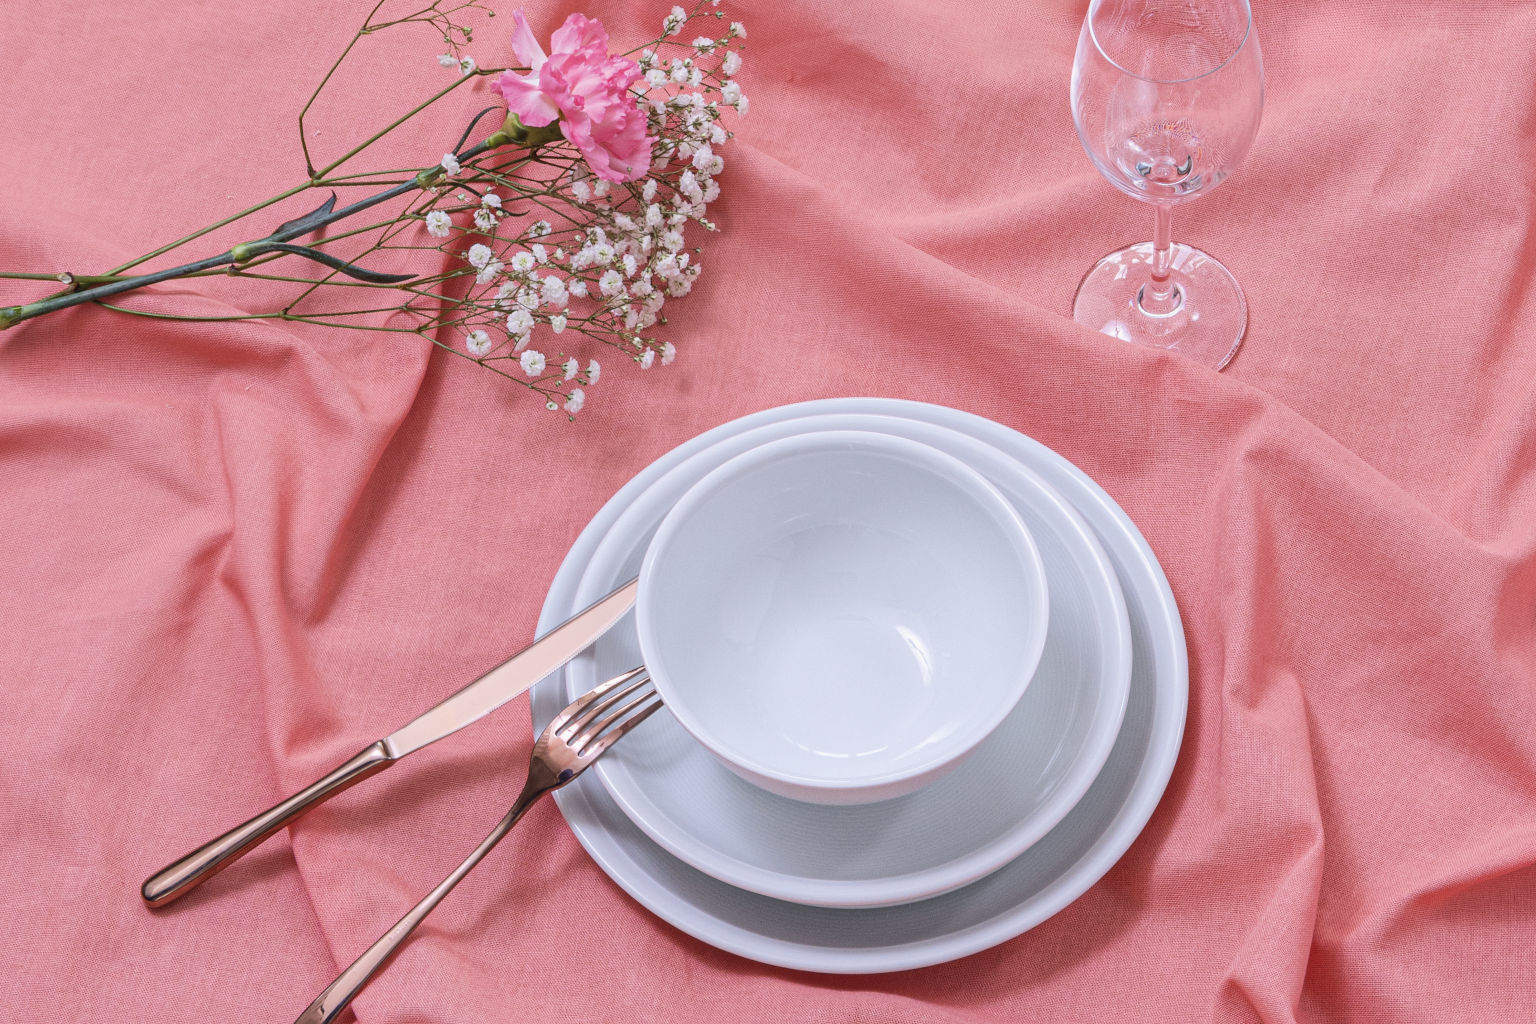 Thomas Trend White bowl and plates pn light pink table cloth